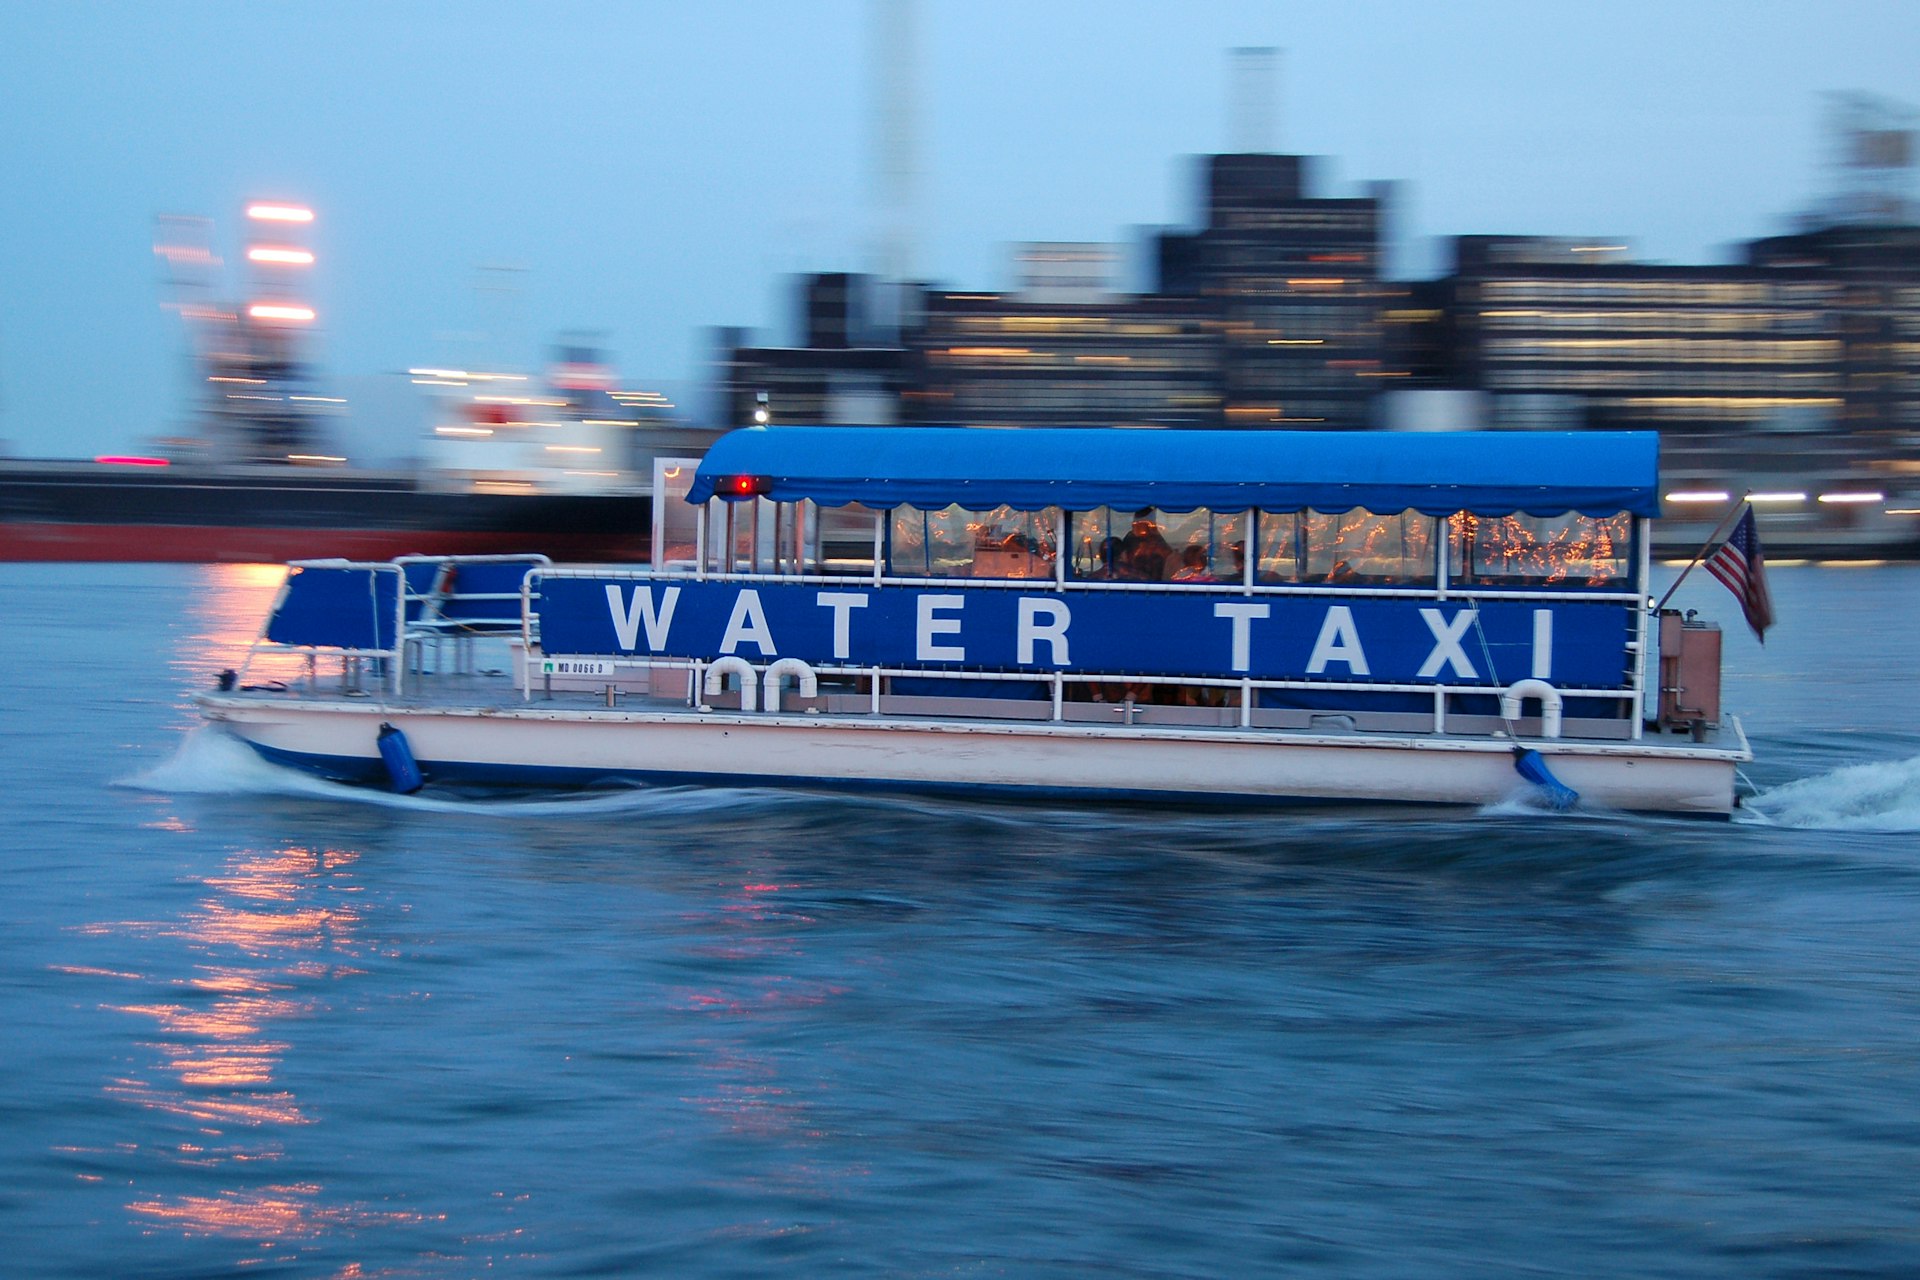 One of Baltimore's convenient water taxis